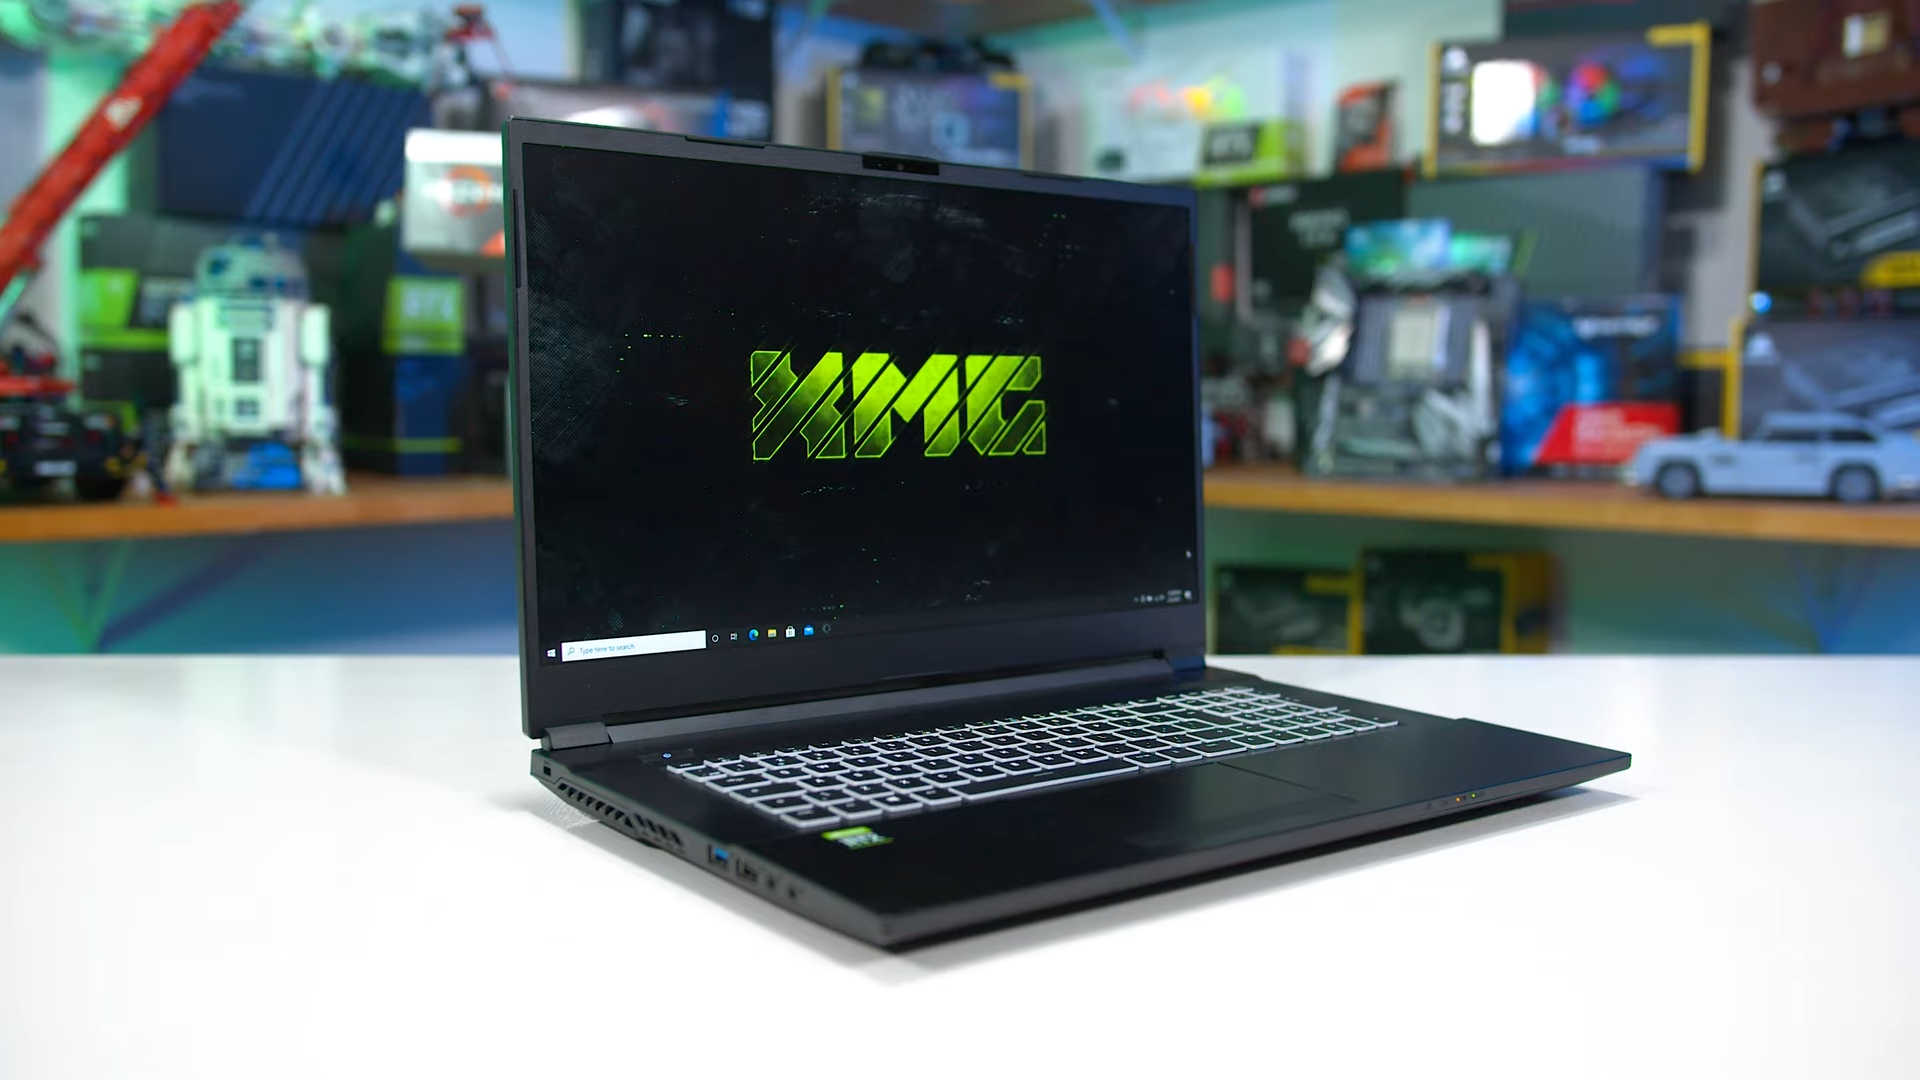 NVIDIA GeForce RTX 3060 laptops are now available - VideoCardz.com